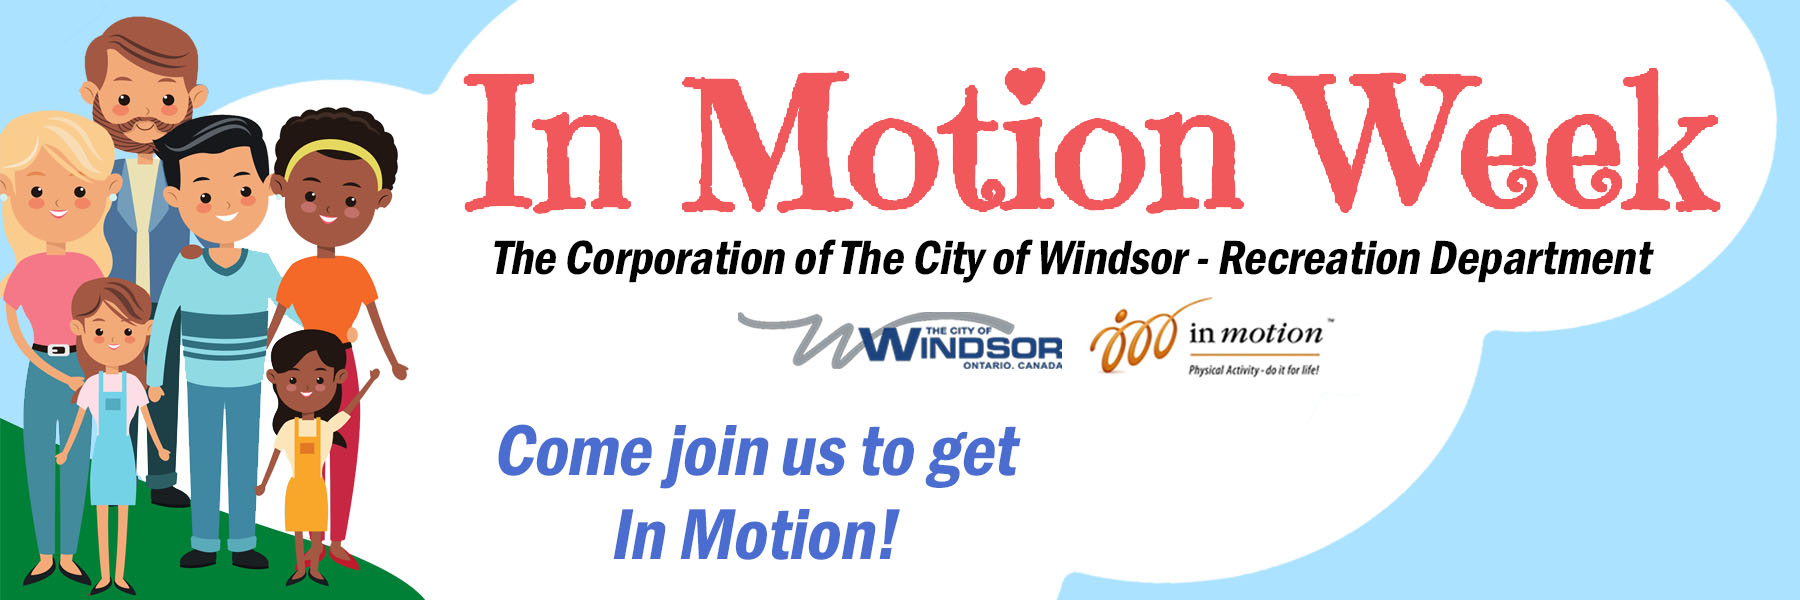 Cartoon adults and children, words Come join us to get In Motion, and logos for City of Windsor and In Motion